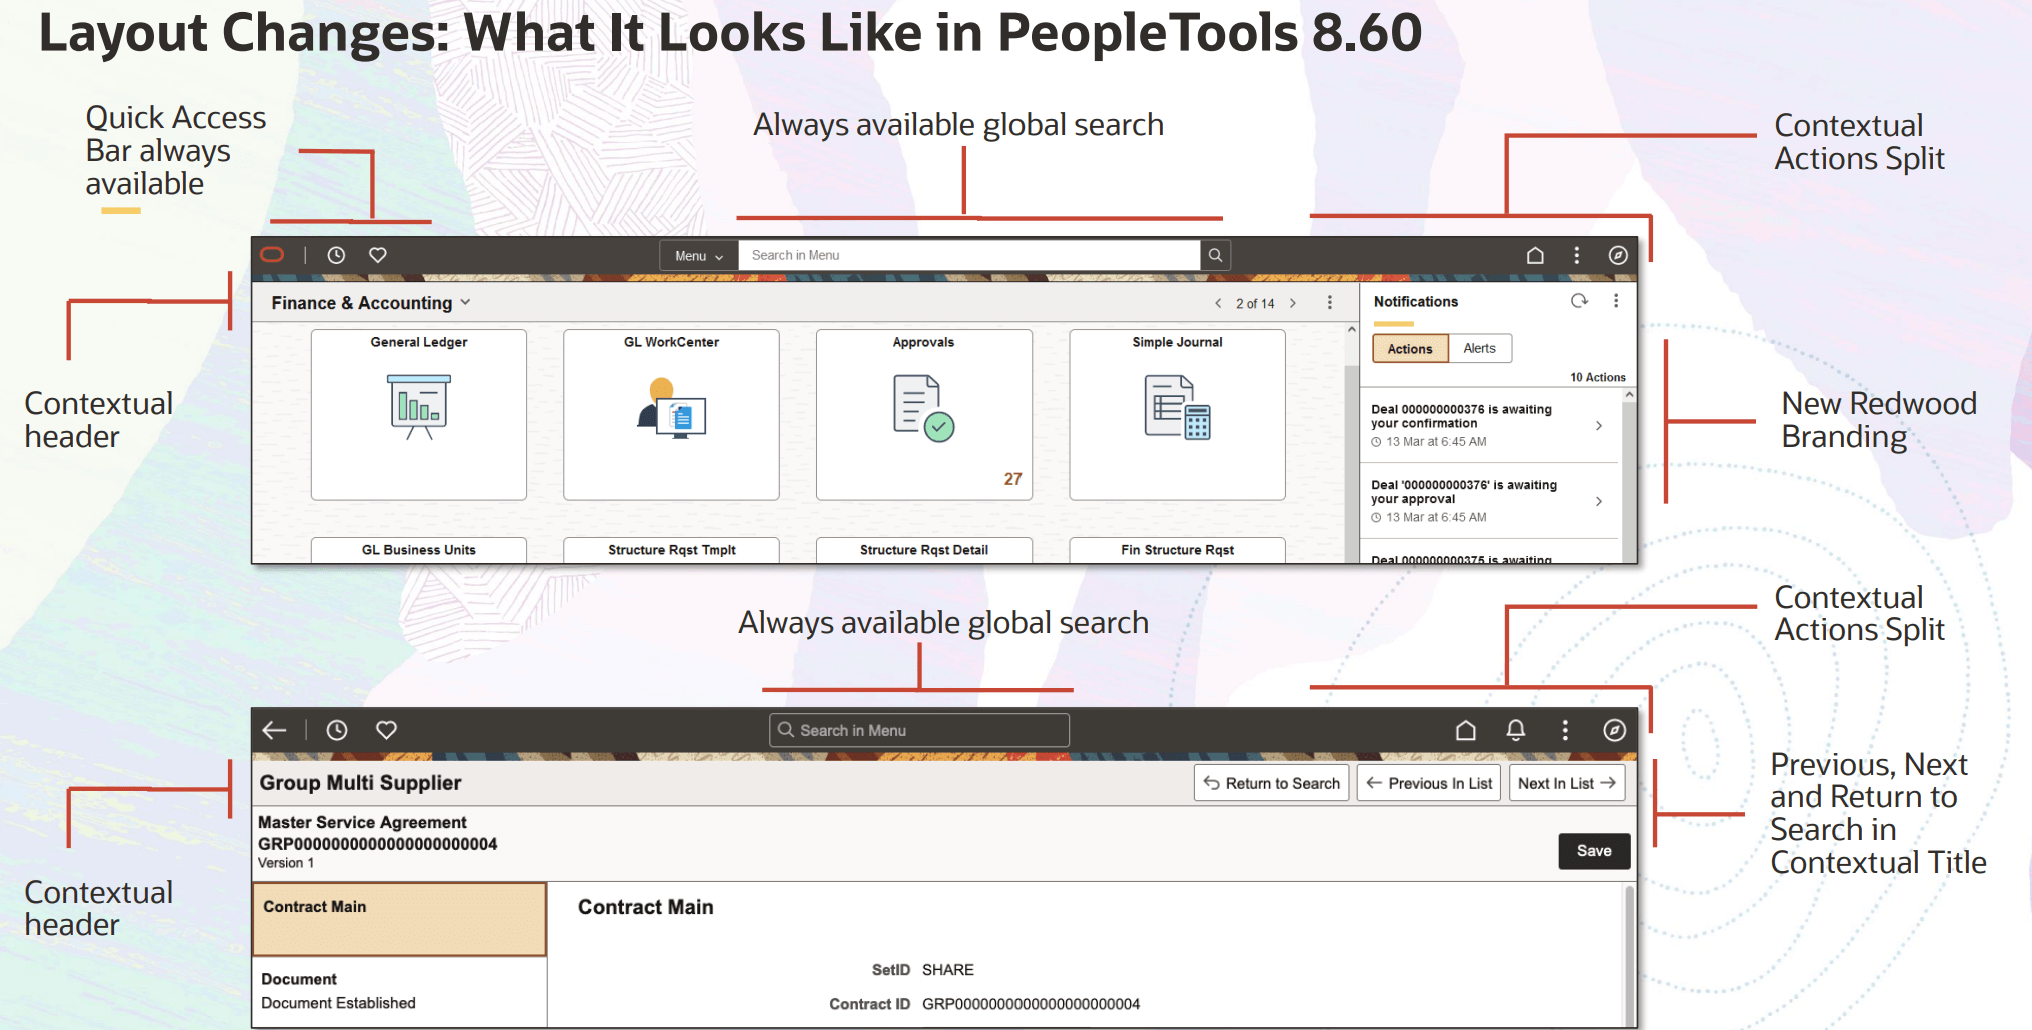 Screen shot of PeopleTools 8.6 Layout Changes